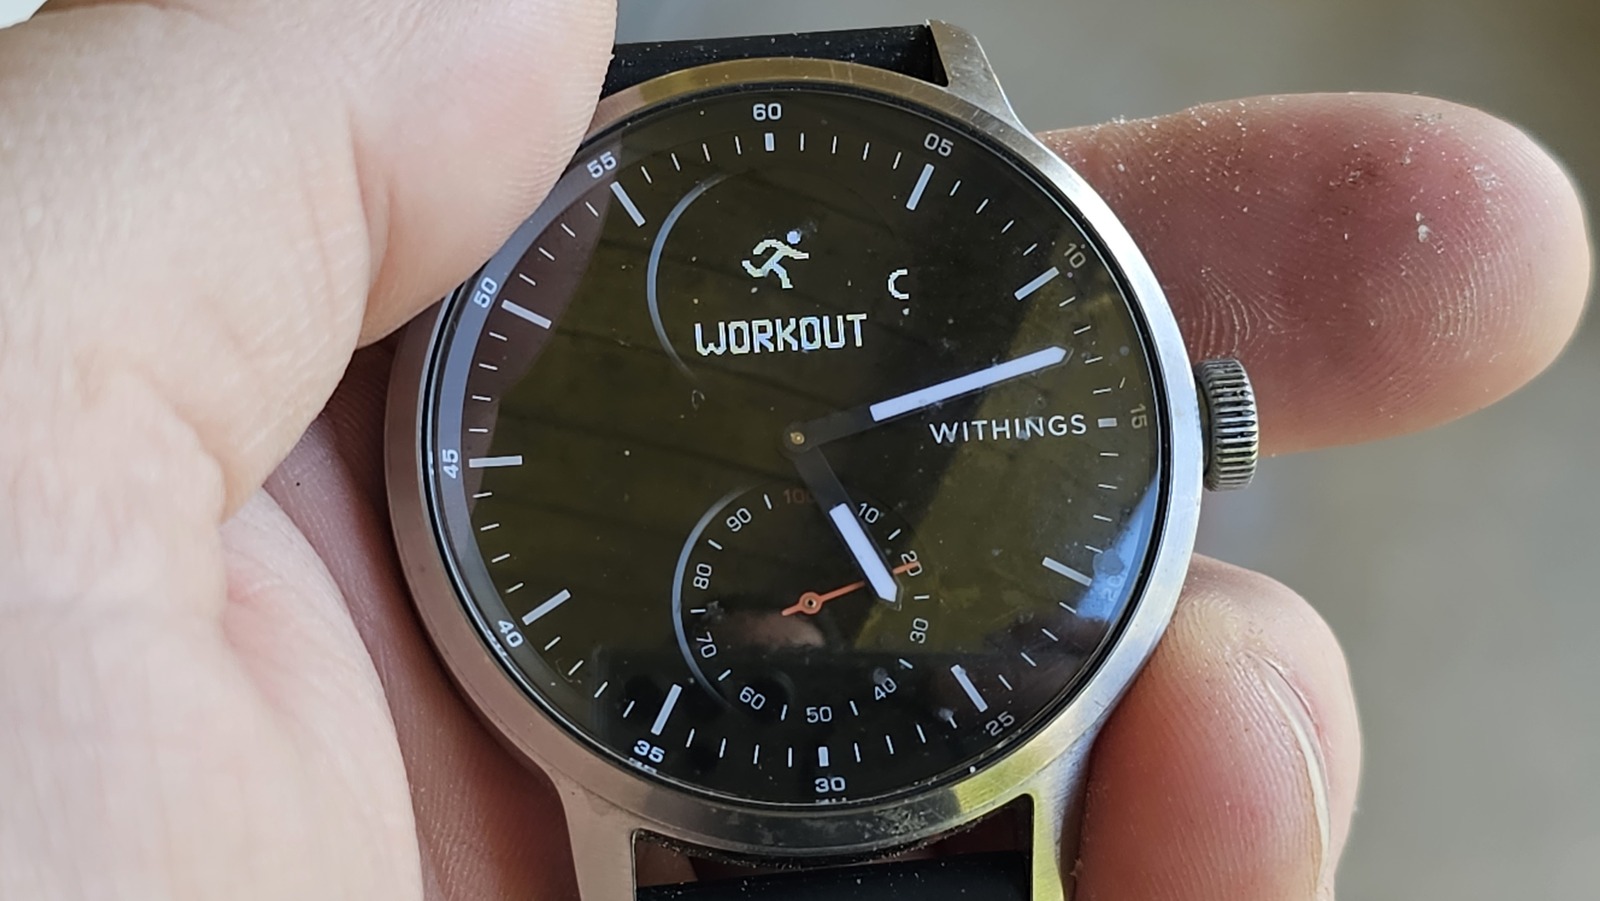 Withings ScanWatch Light review: A smartwatch for regular watch fans